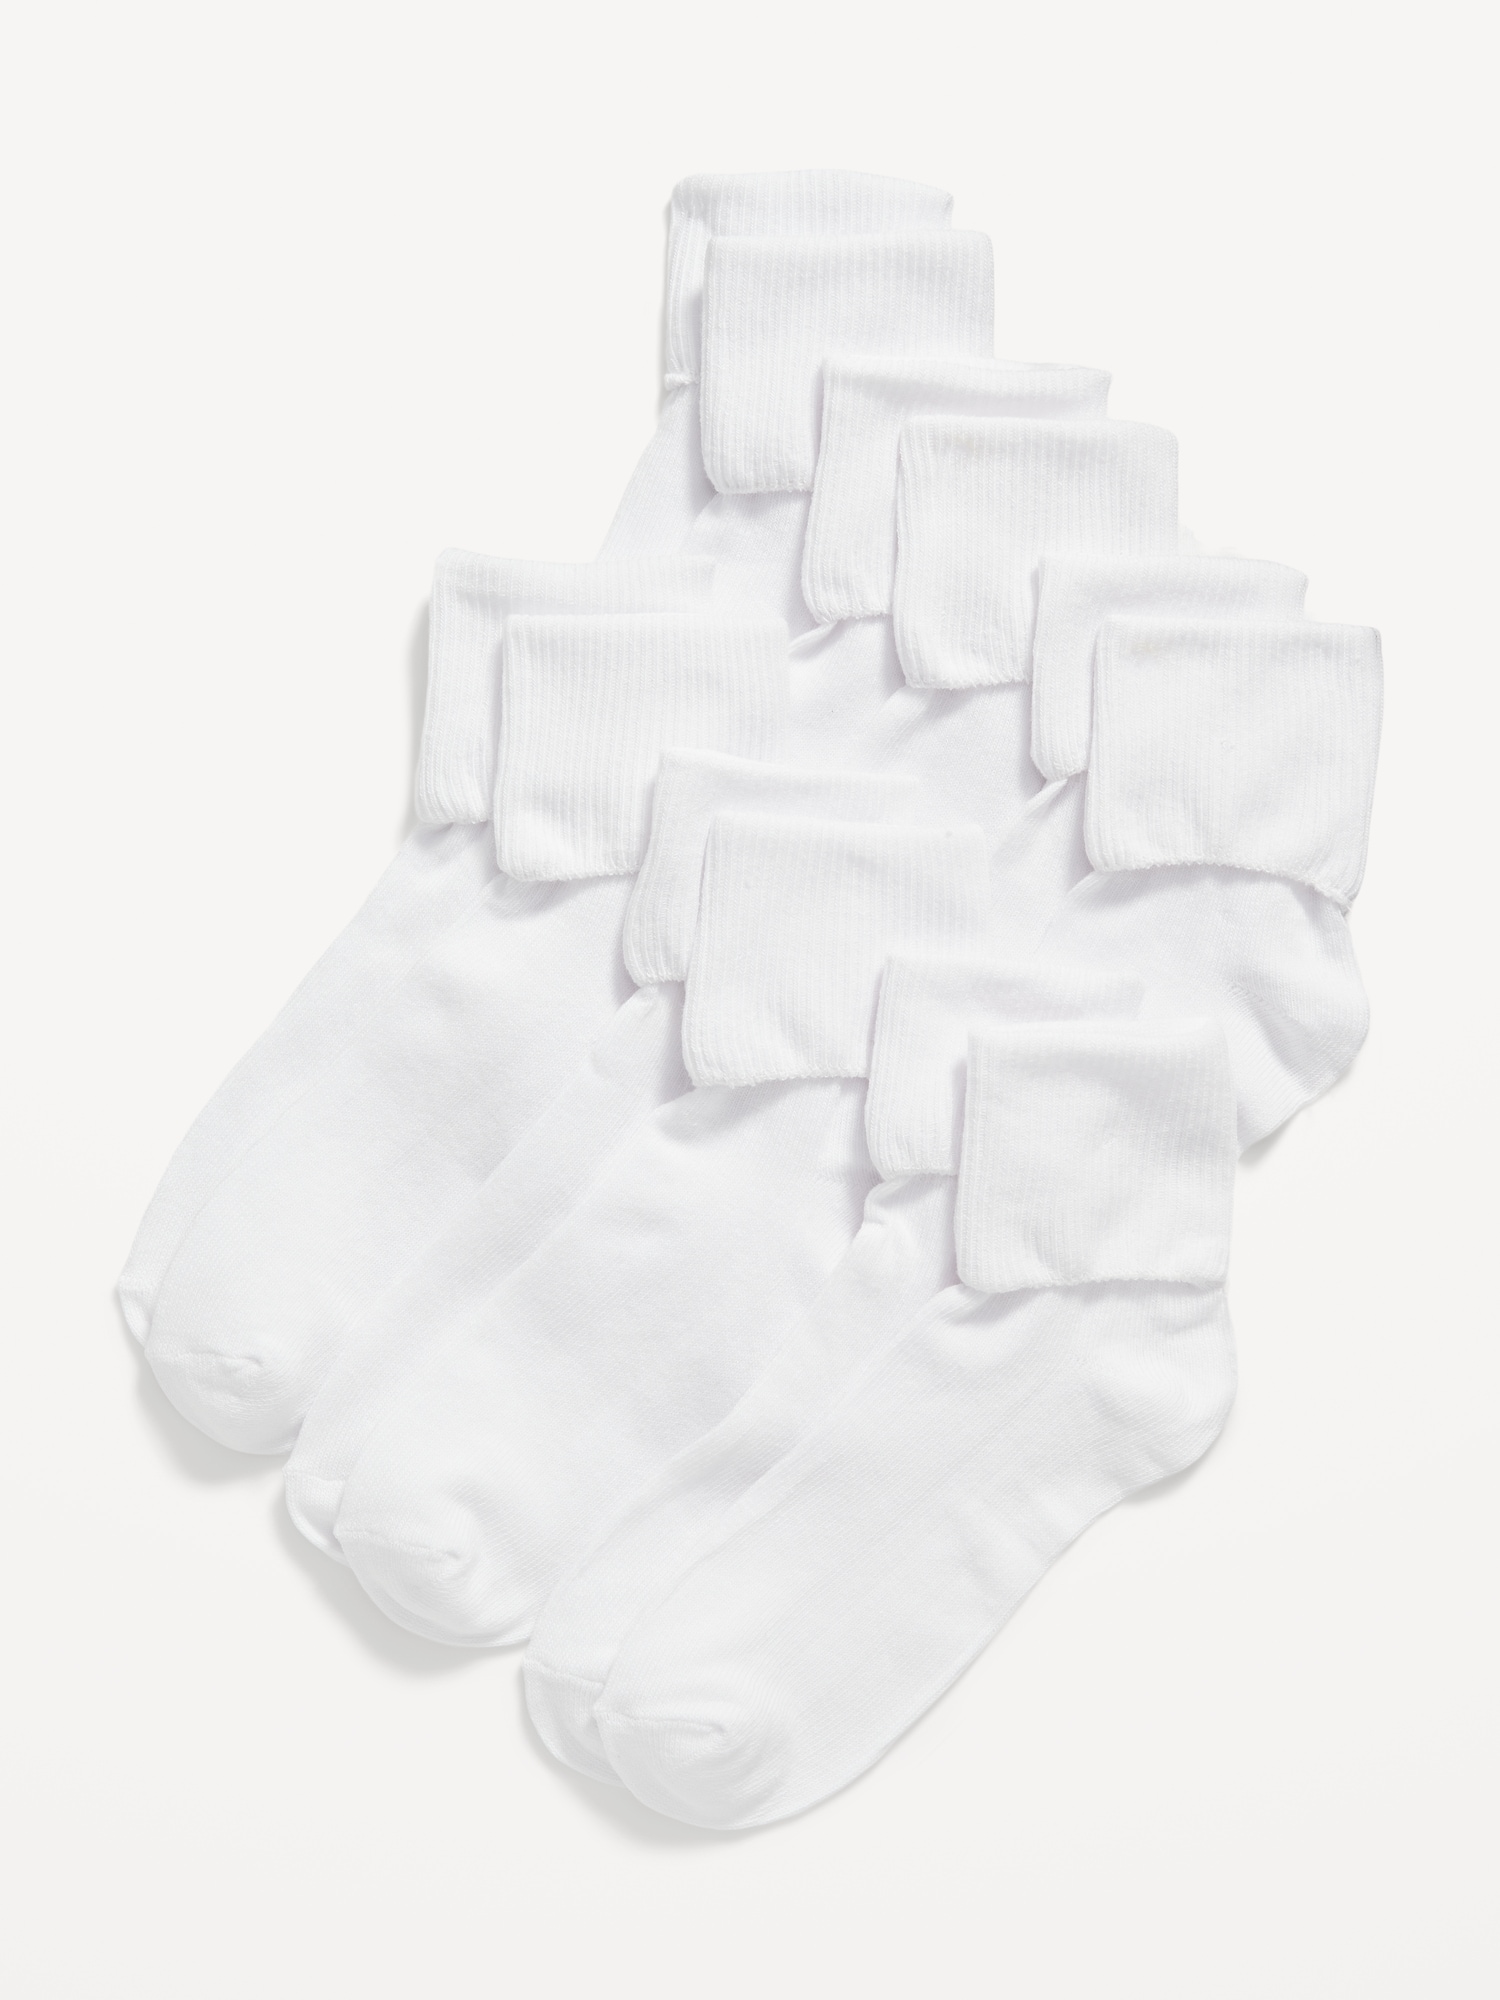 Turn-Cuff Socks 6-Pack for Girls | Old Navy